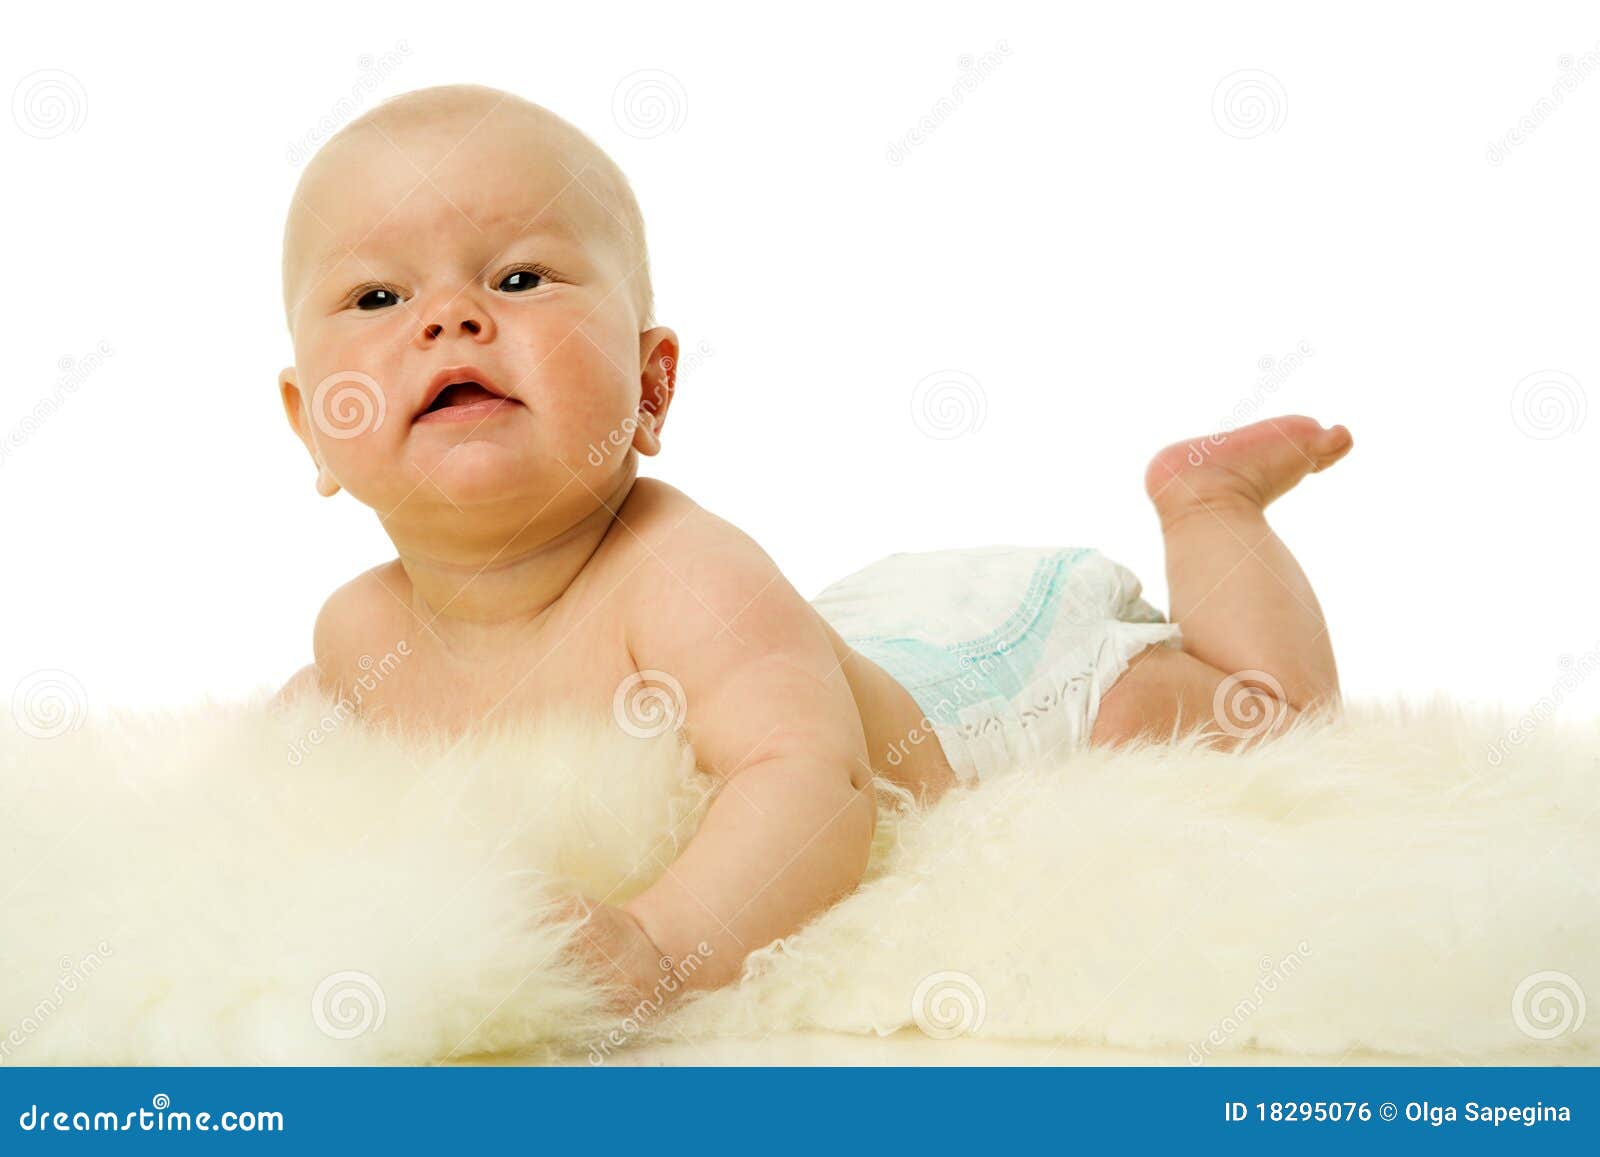 Baby Lying Down Royalty Free Stock Image - Image: 18295076